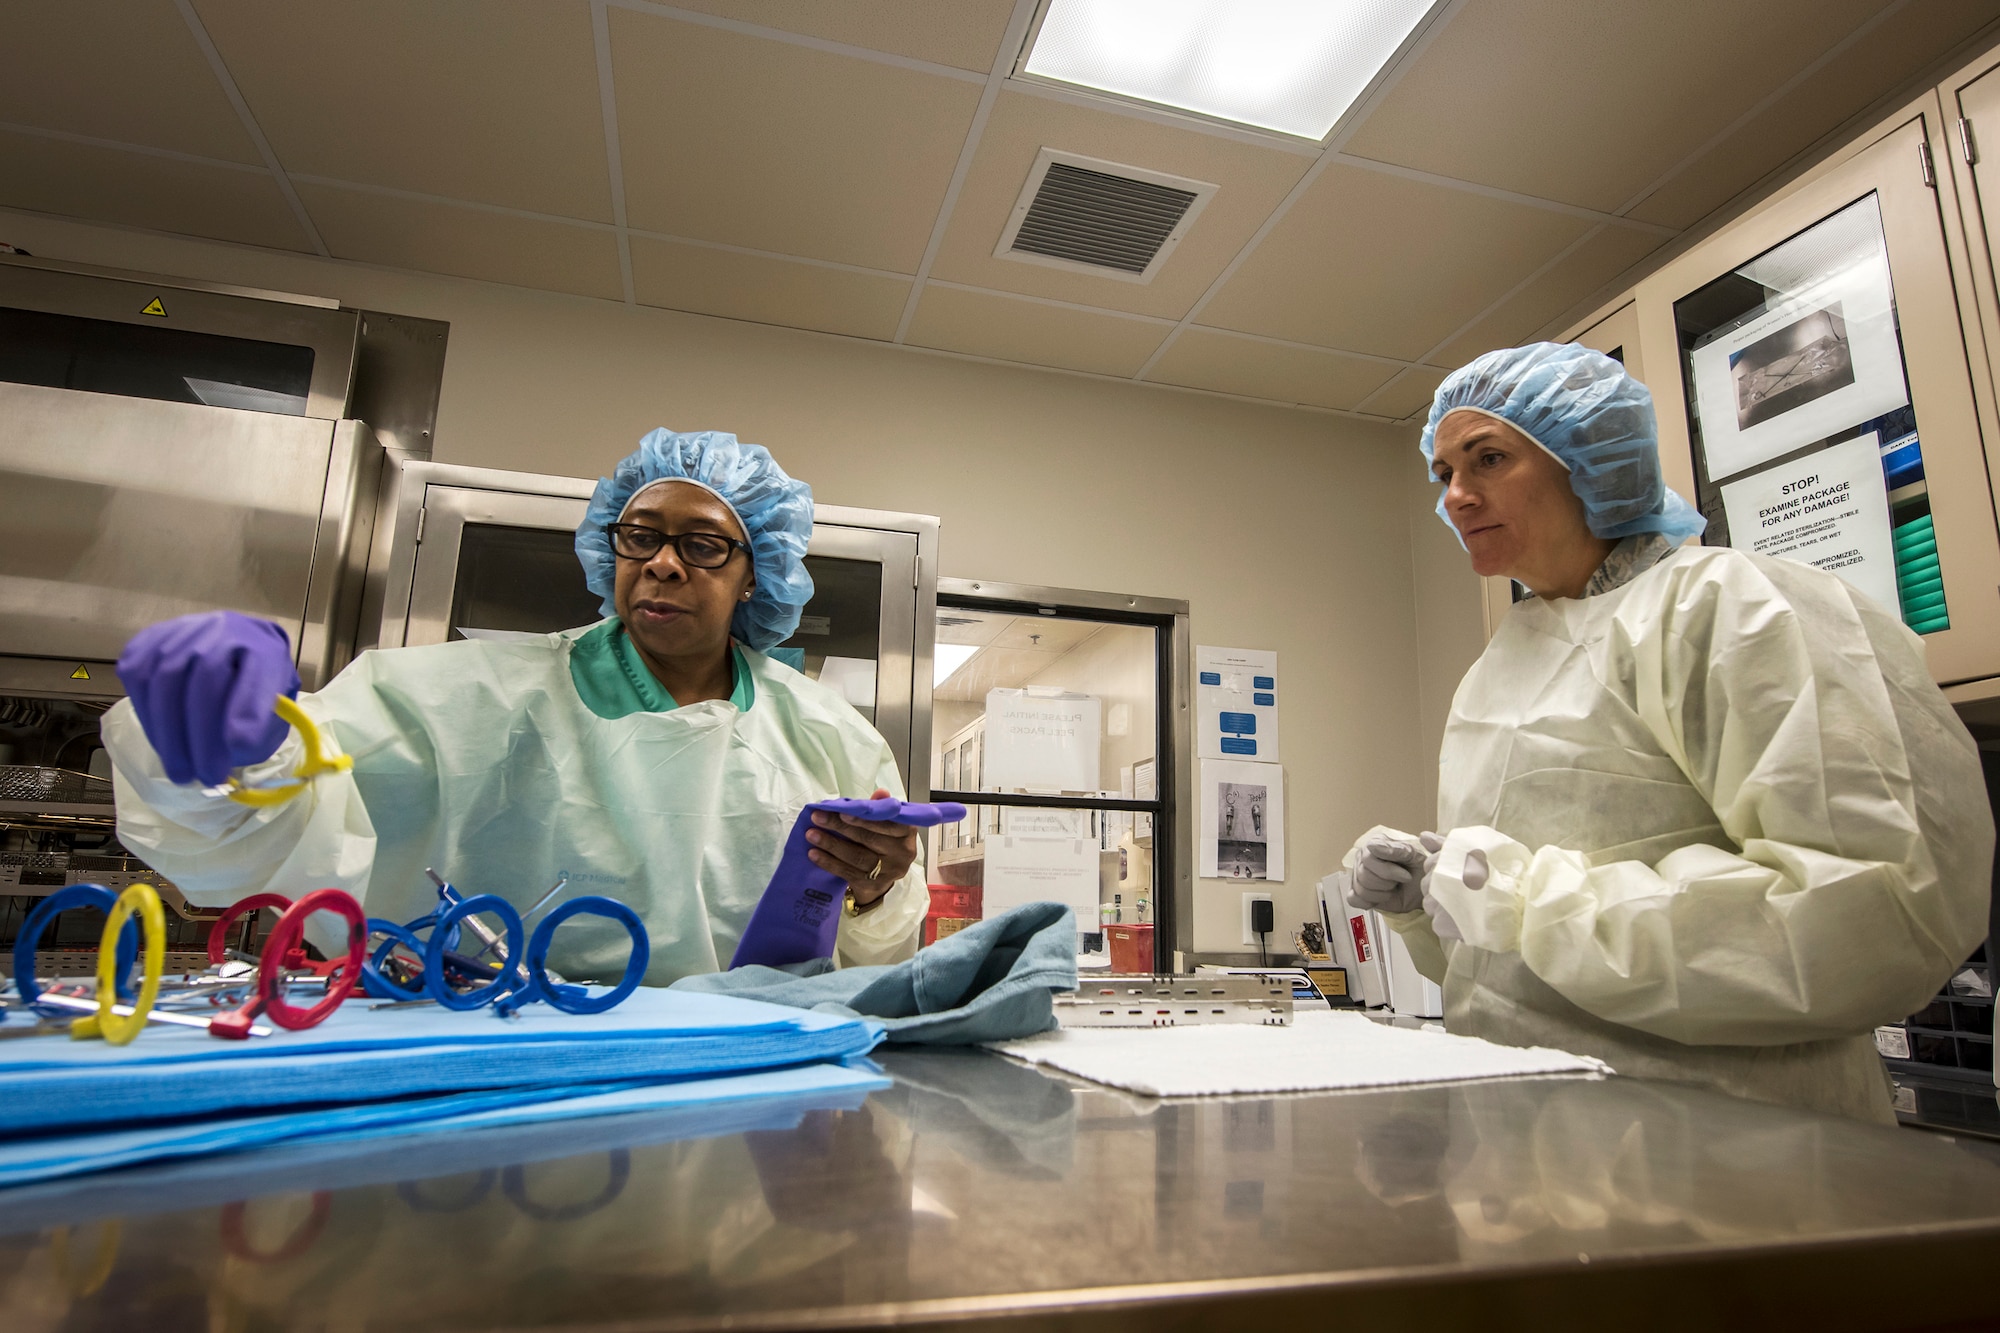 Col. Jennifer Short, right, 23d Wing commander, and Sandra Pittman, 23d Medical Group (MDG) dental assistant, inspect cleaning tools, April 30, 2018, at Moody Air Force Base, Ga. Short toured the 23d MDG to gain a better understanding of their overall mission, capabilities, and comprehensive duties, and was able to experience the day-to-day operations of the various units within the 23d MDG, ranging from bioenvironmental to ambulatory care. (U.S. Air Force photo by Airman 1st Class Eugene Oliver)